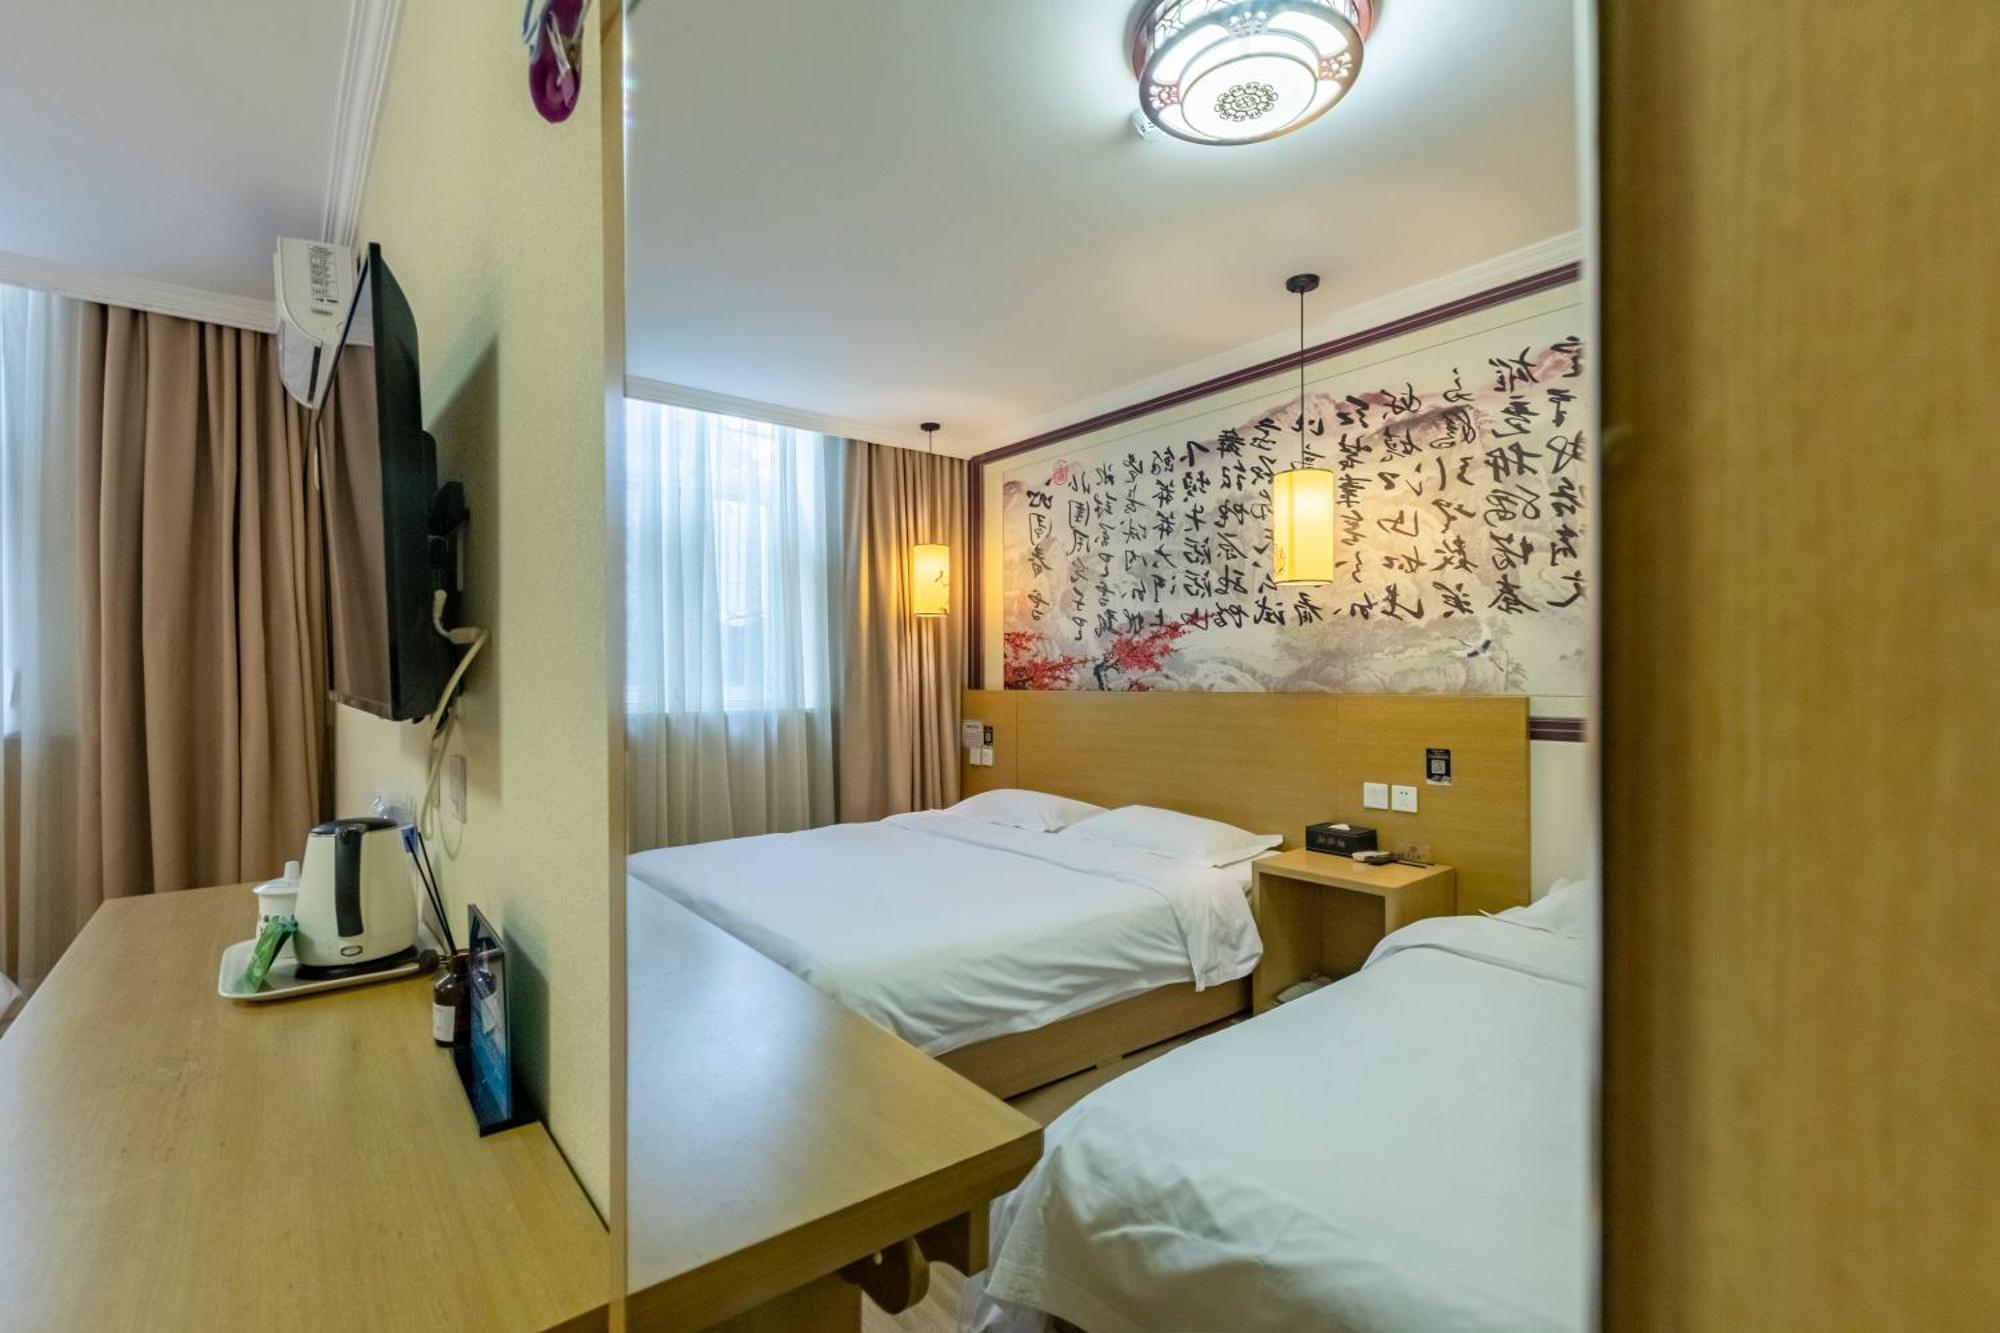 Happy Dragon Alley Hotel-In The City Center With Big Window&Free Coffe, Fluent English Speaking,Tourist Attractions Ticket Service&Food Recommendation,Near Tian Anmen Forbiddencity,Near Lama Temple,Easy To Walk To Nanluoalley&Shichahai Beijing Eksteriør billede